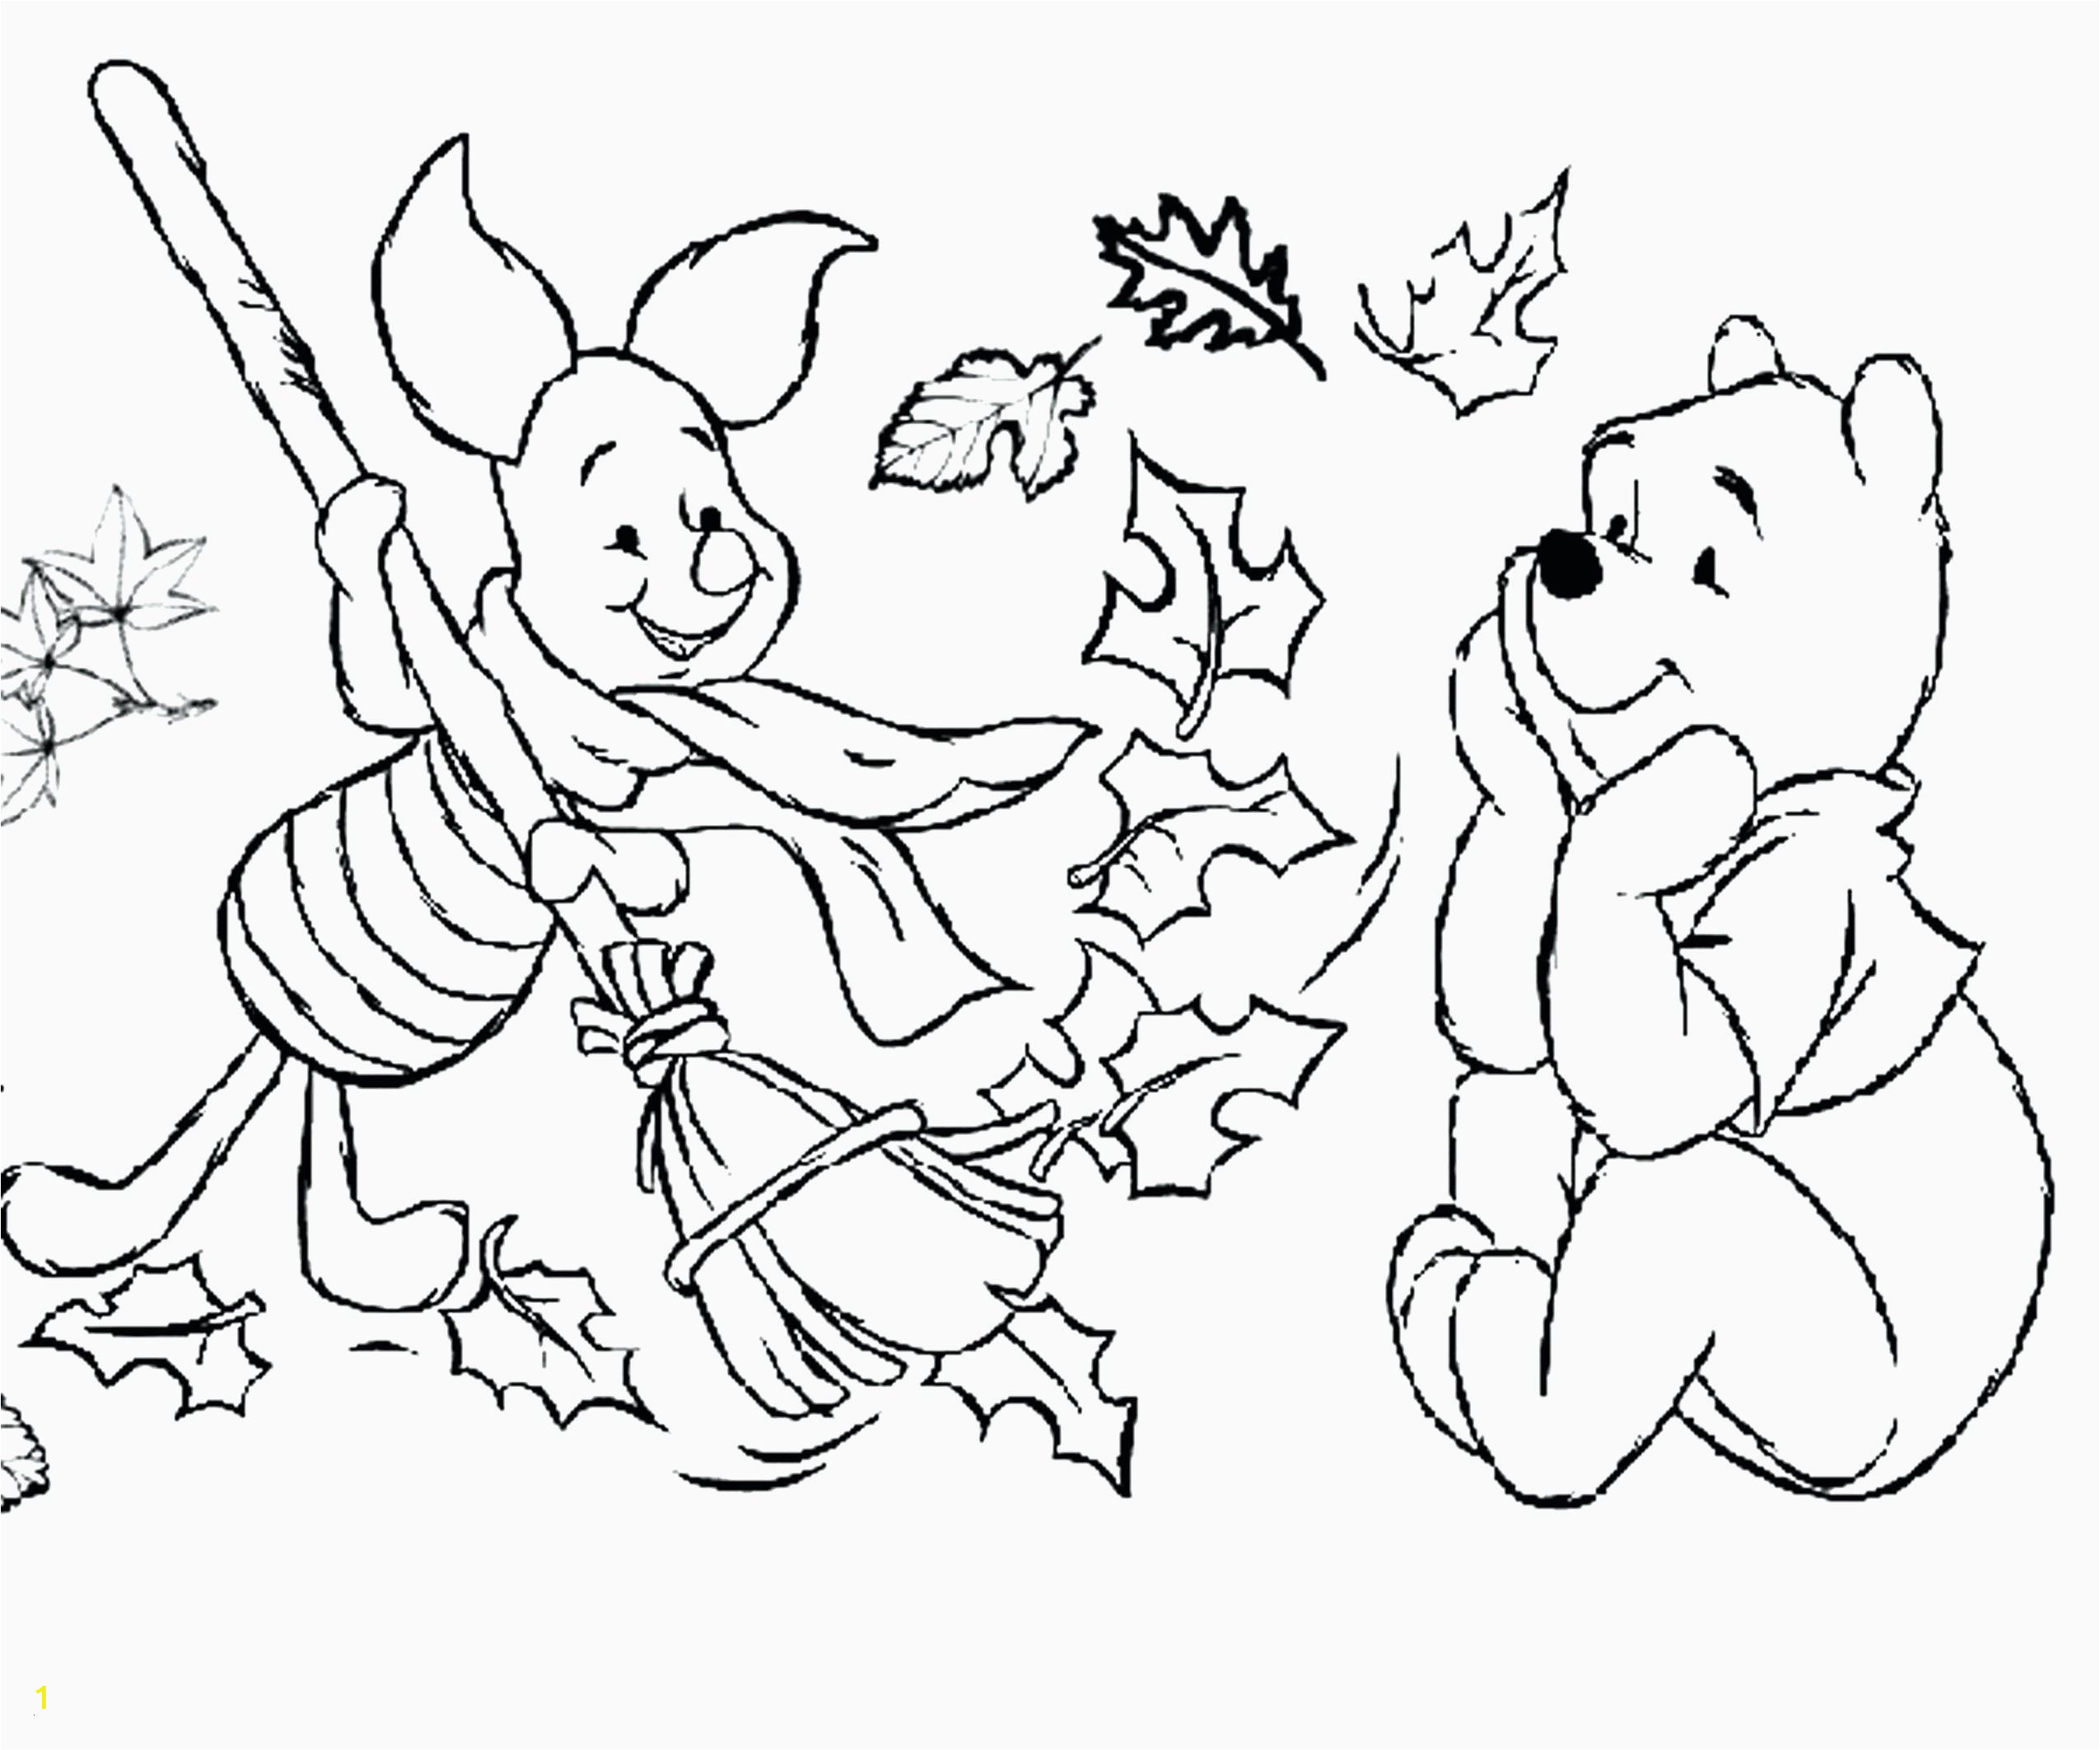 Halloween Coloring Pages Disney Printable Free Coloring Pages for Preschool Di 2020